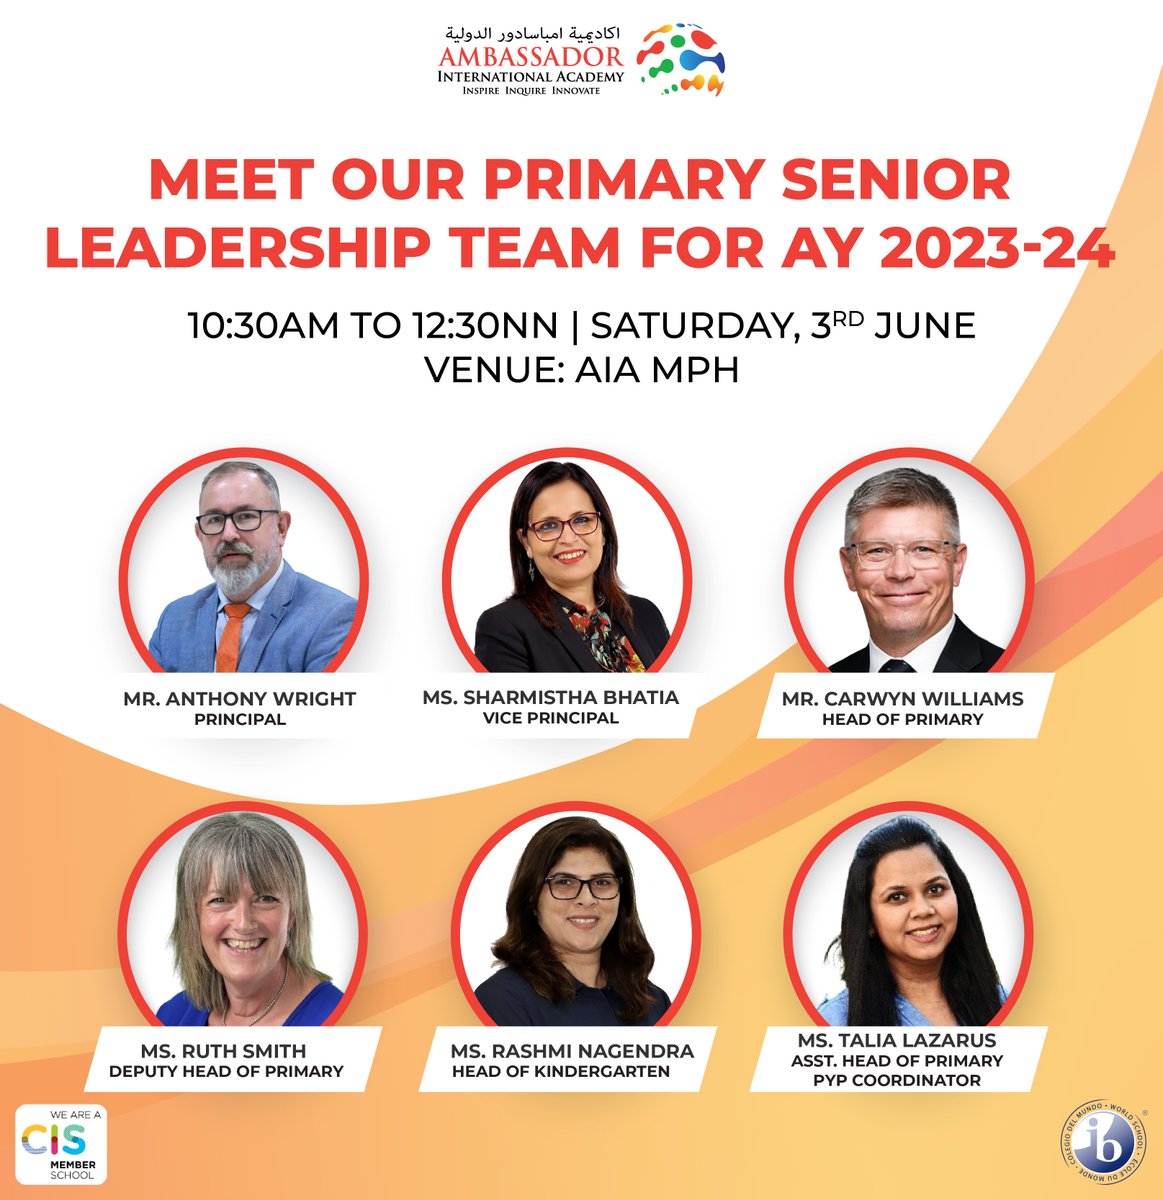 📣 Join us for a cup of coffee and get to know our Senior and Middle Leadership Team members! ☕️🌟
 
#AIADubai #AIACommunity #ibschool #ibeducation #dubaischools #dubaieducation #parentengagement #newleadership #excitingtimesahead